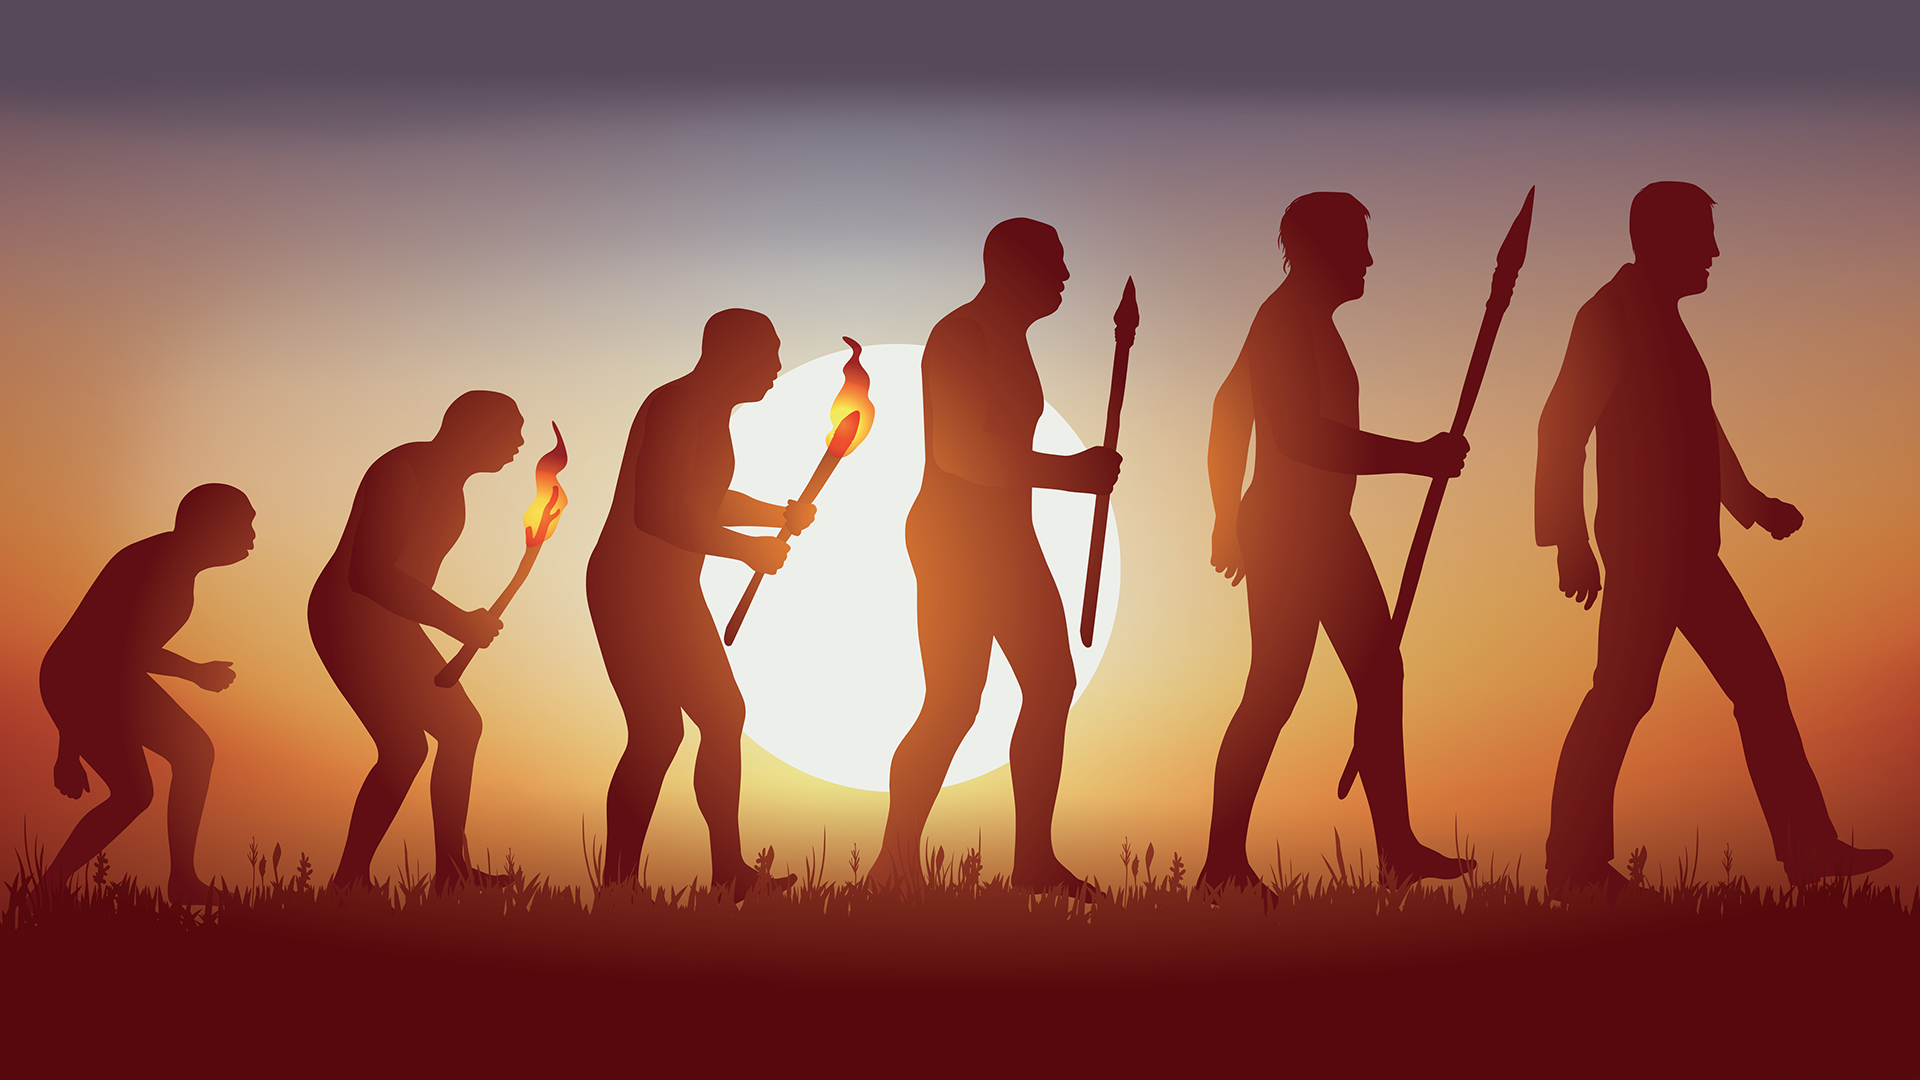 Abstract Background Of The Evolution Of Man Royalty Free SVG